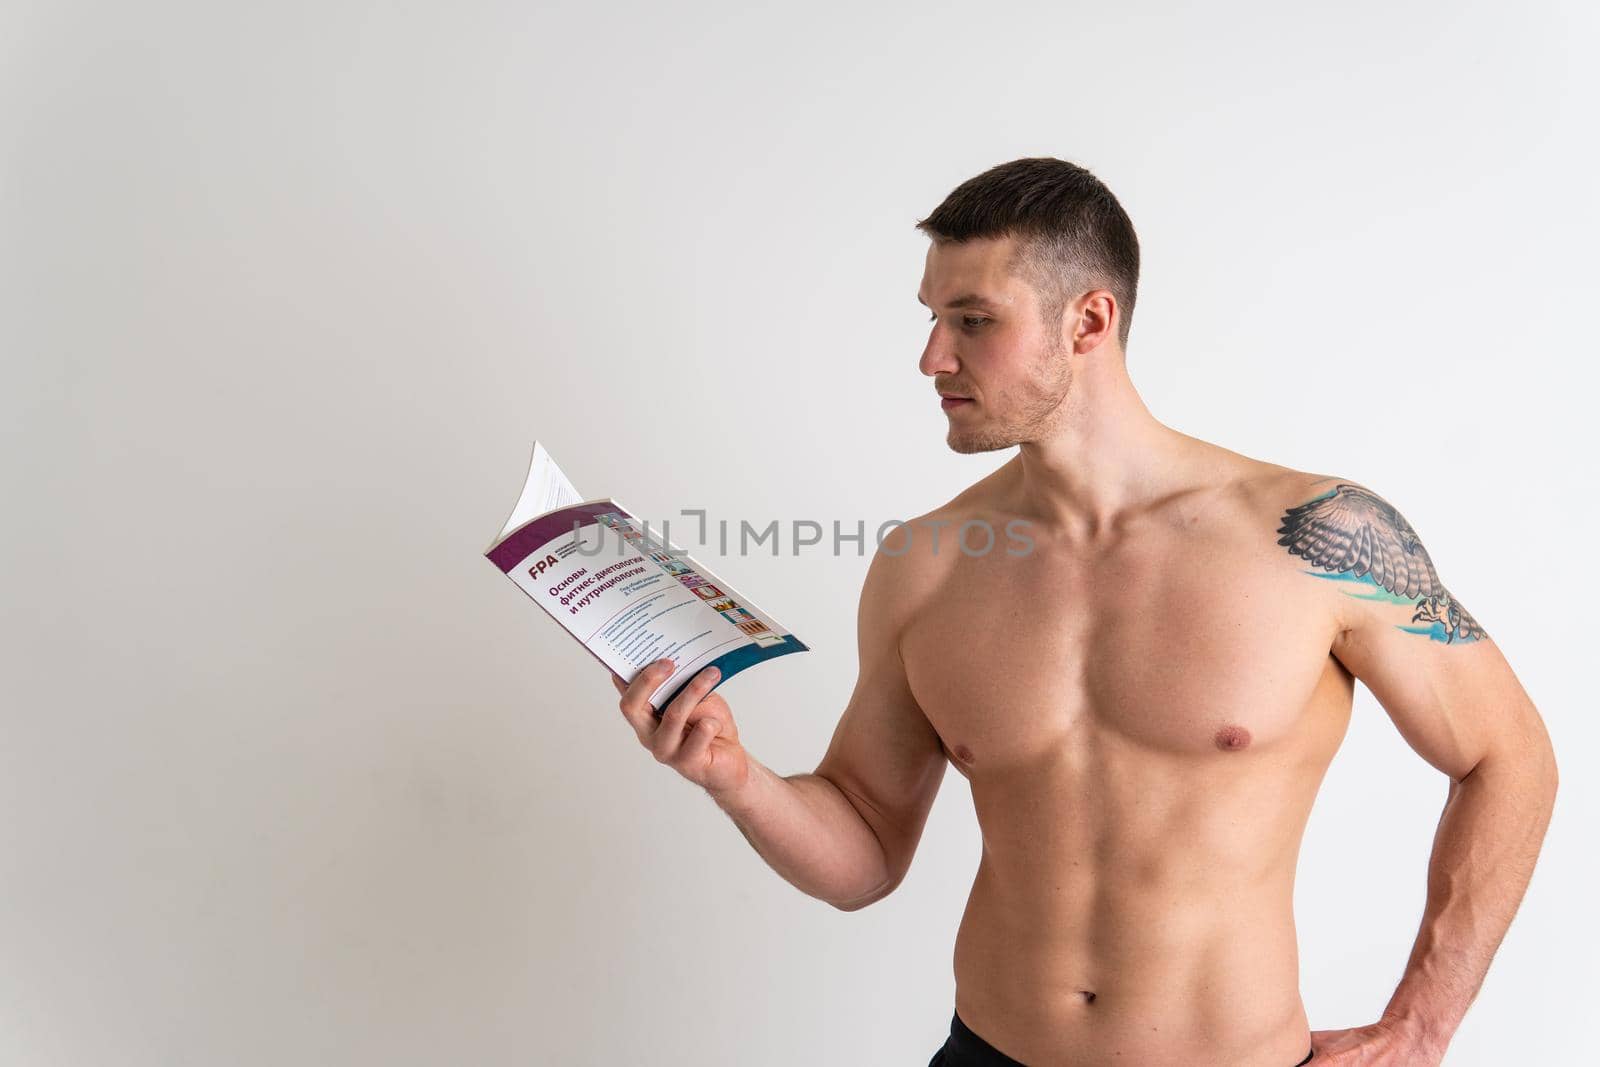 Bodybuilder reads the book on a white background isolated at the bottom of his head on his hands bodybuilder muscular, muscle fitness muscles, sexy sport. Health ABS holding, beach tan